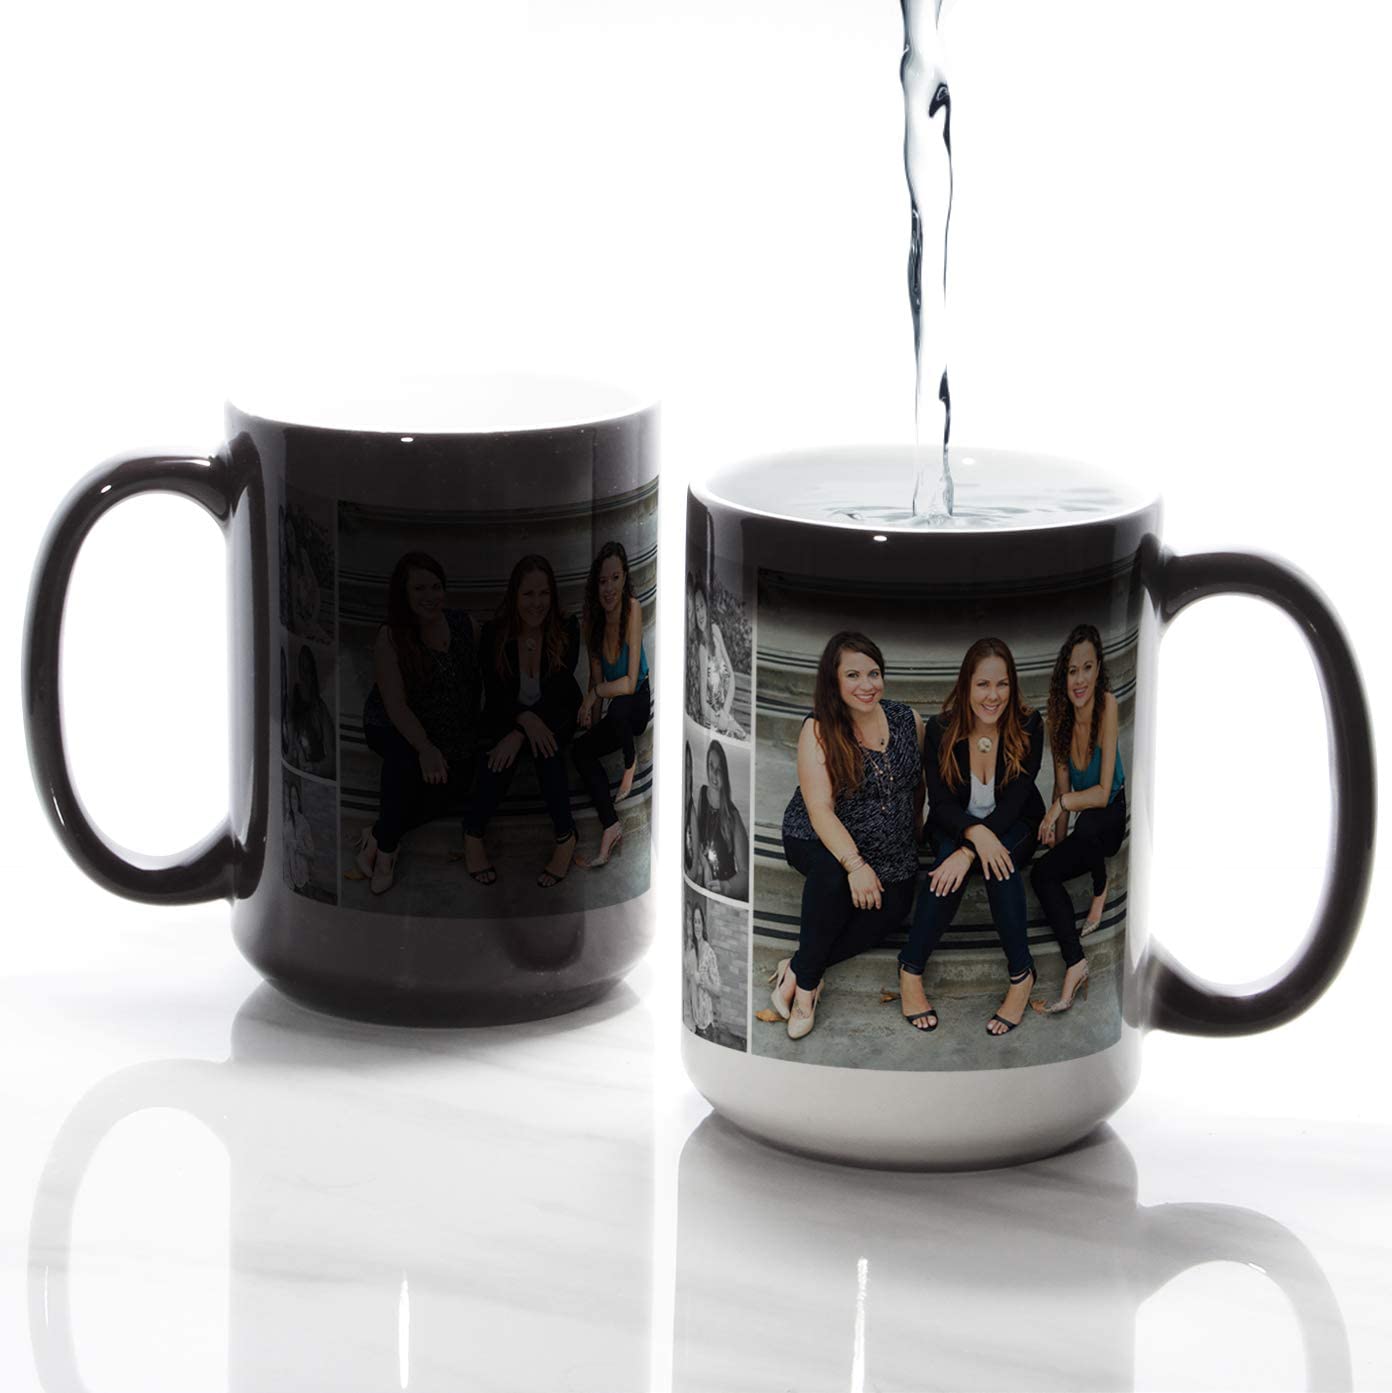 Printed Magic Mug (Big Size) for Branded and Promotional Gifts